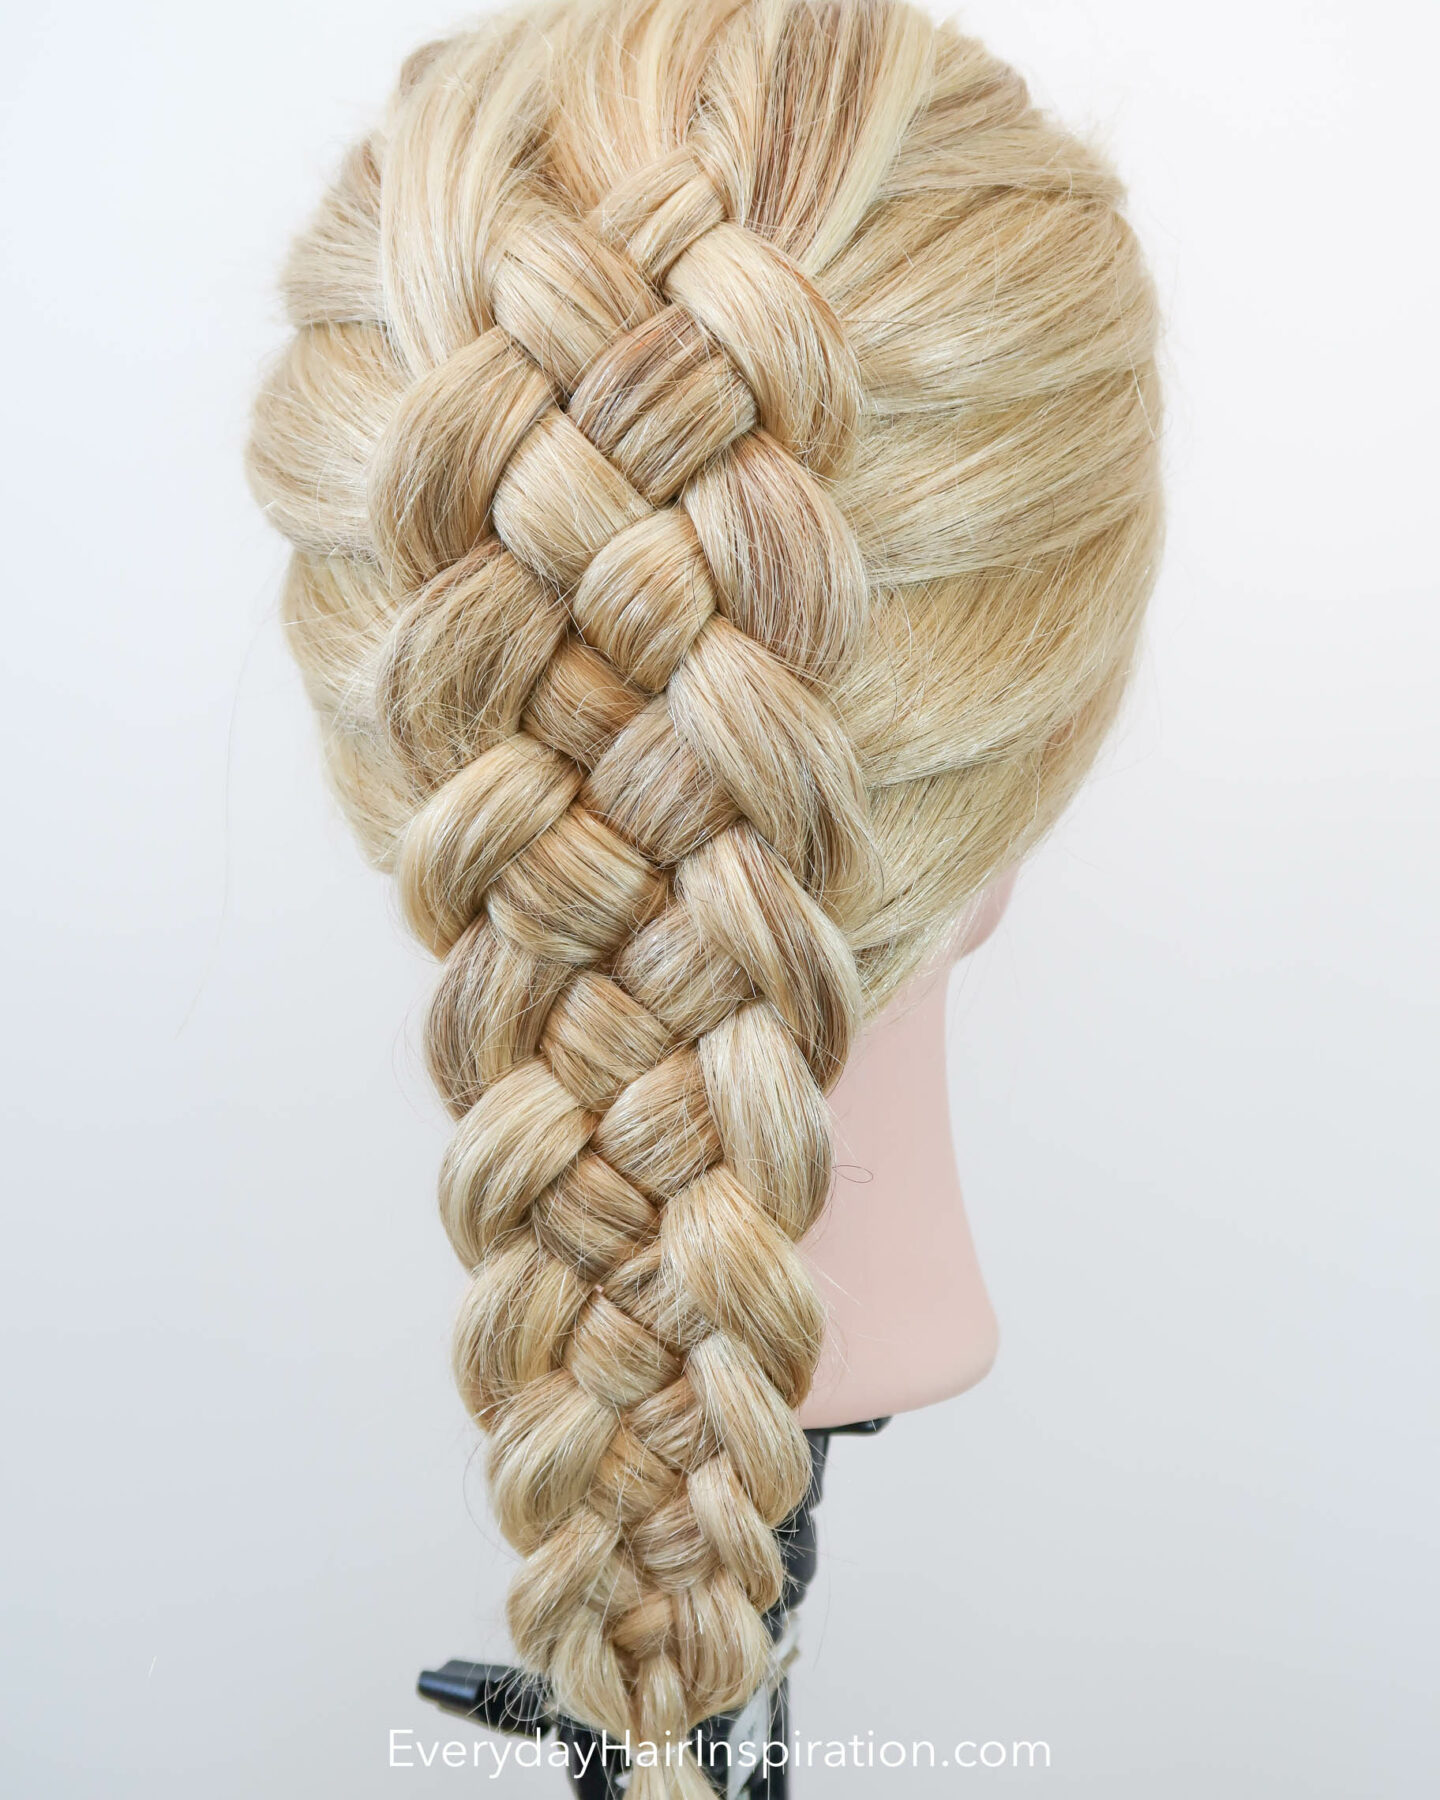 Blonde hairdresser doll with the hair styled into a dutch 5 strand braid, seen from an angle.